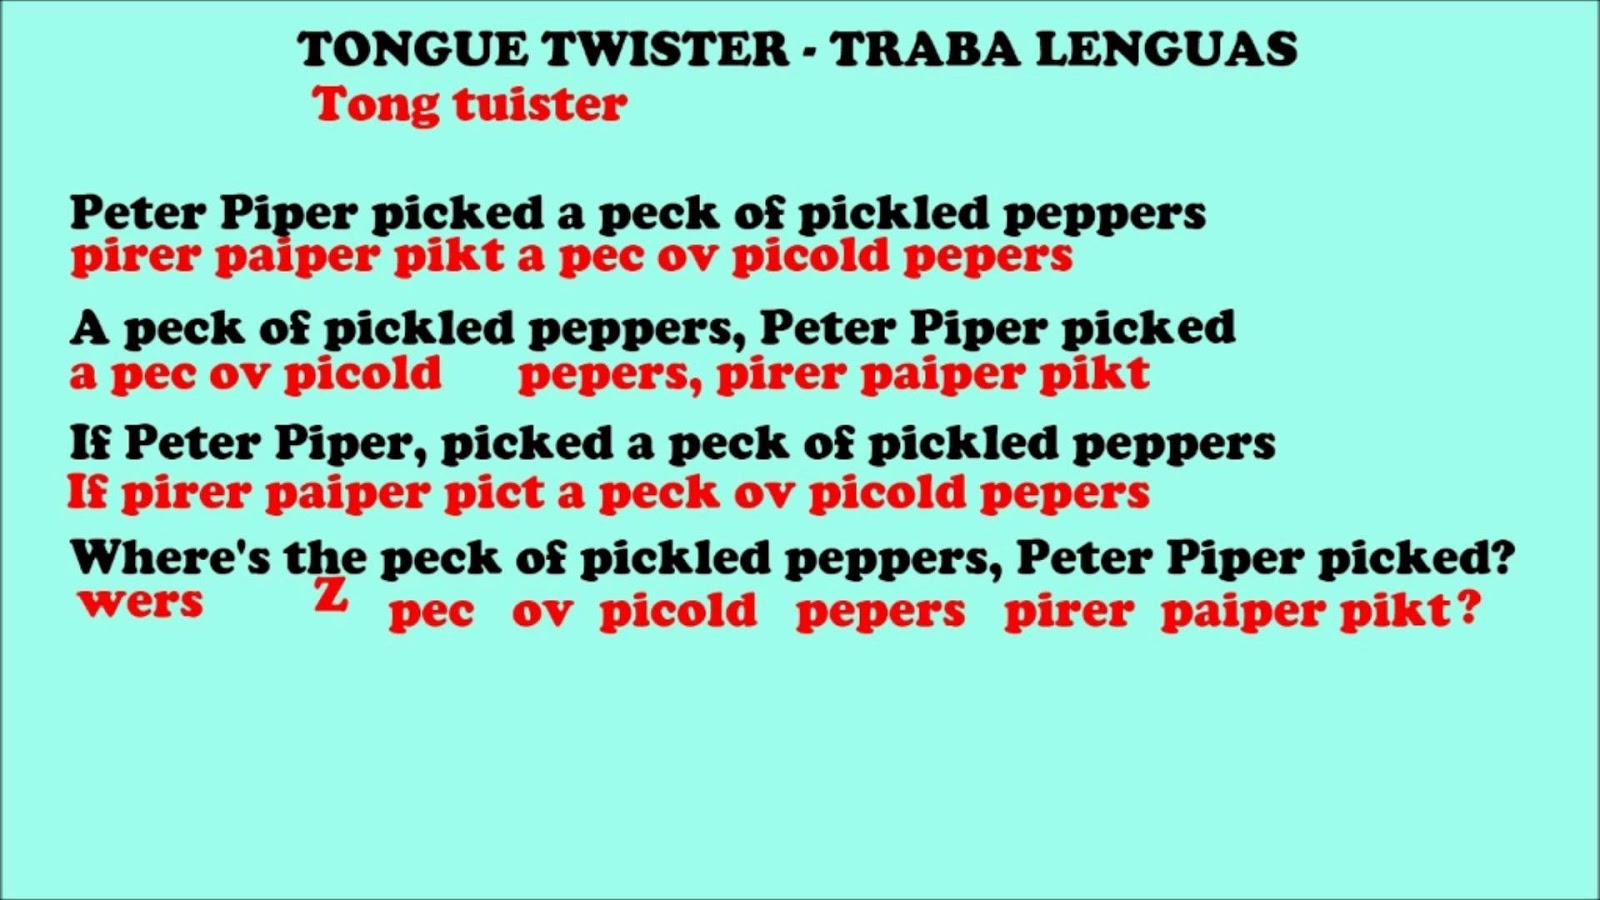 Peter picked pepper. Скороговорка Peter Piper. Tongue Twisters in English. Питер Пайпер скороговорка на английском. Скороговорка на английском Peter Piper.